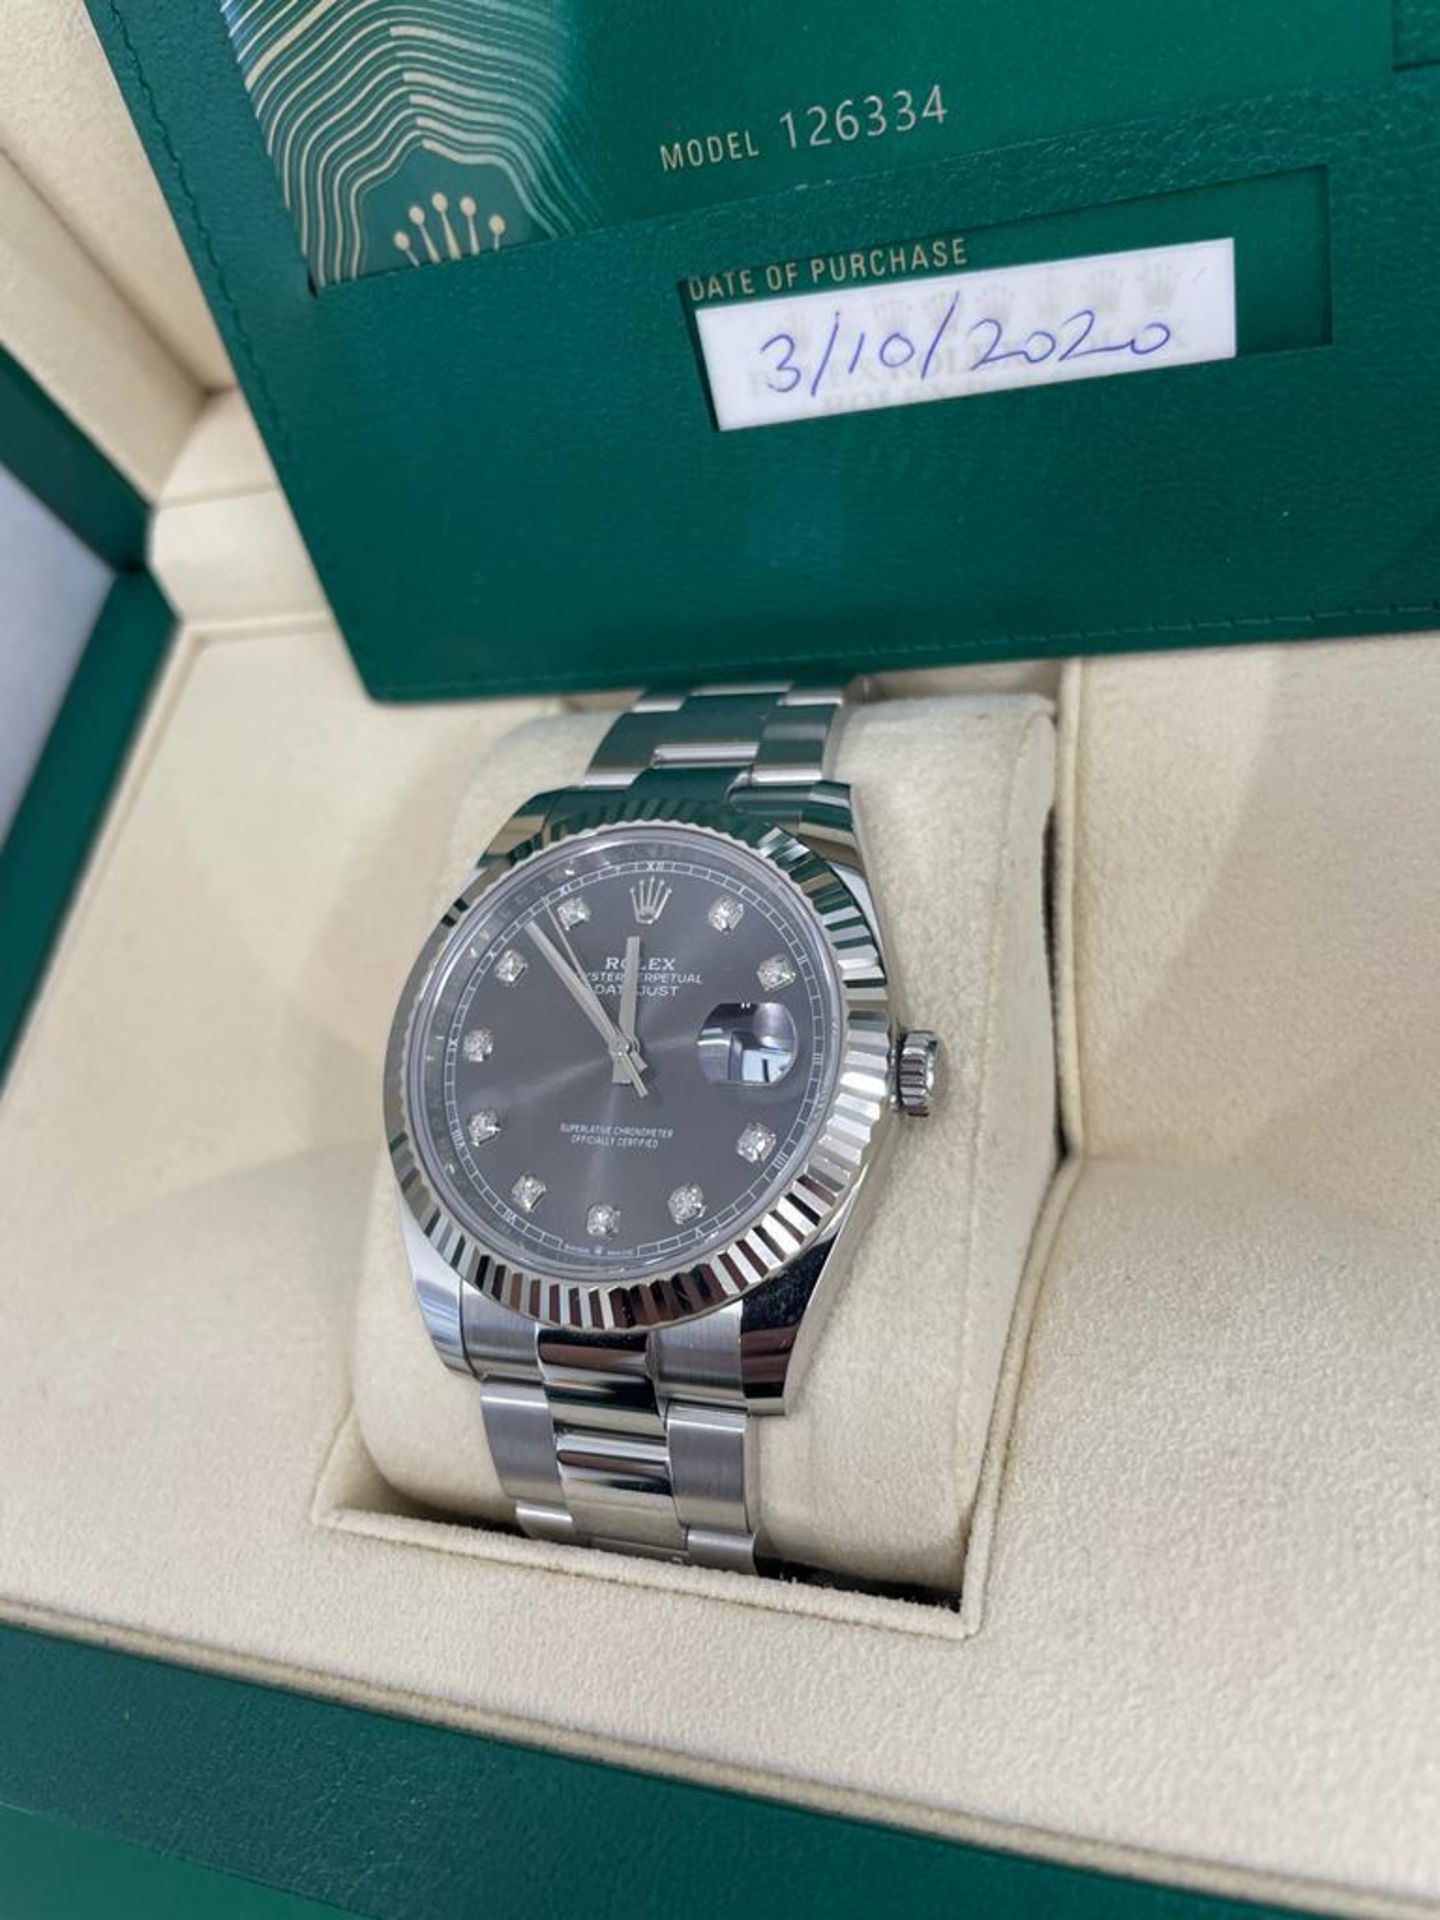 A ROLEX DATEJUST 40 MM WRIST WATCH WITH STAINLESS STEEL CASE, OYSTER STAINLESS STEEL BRACELET, - Image 2 of 4